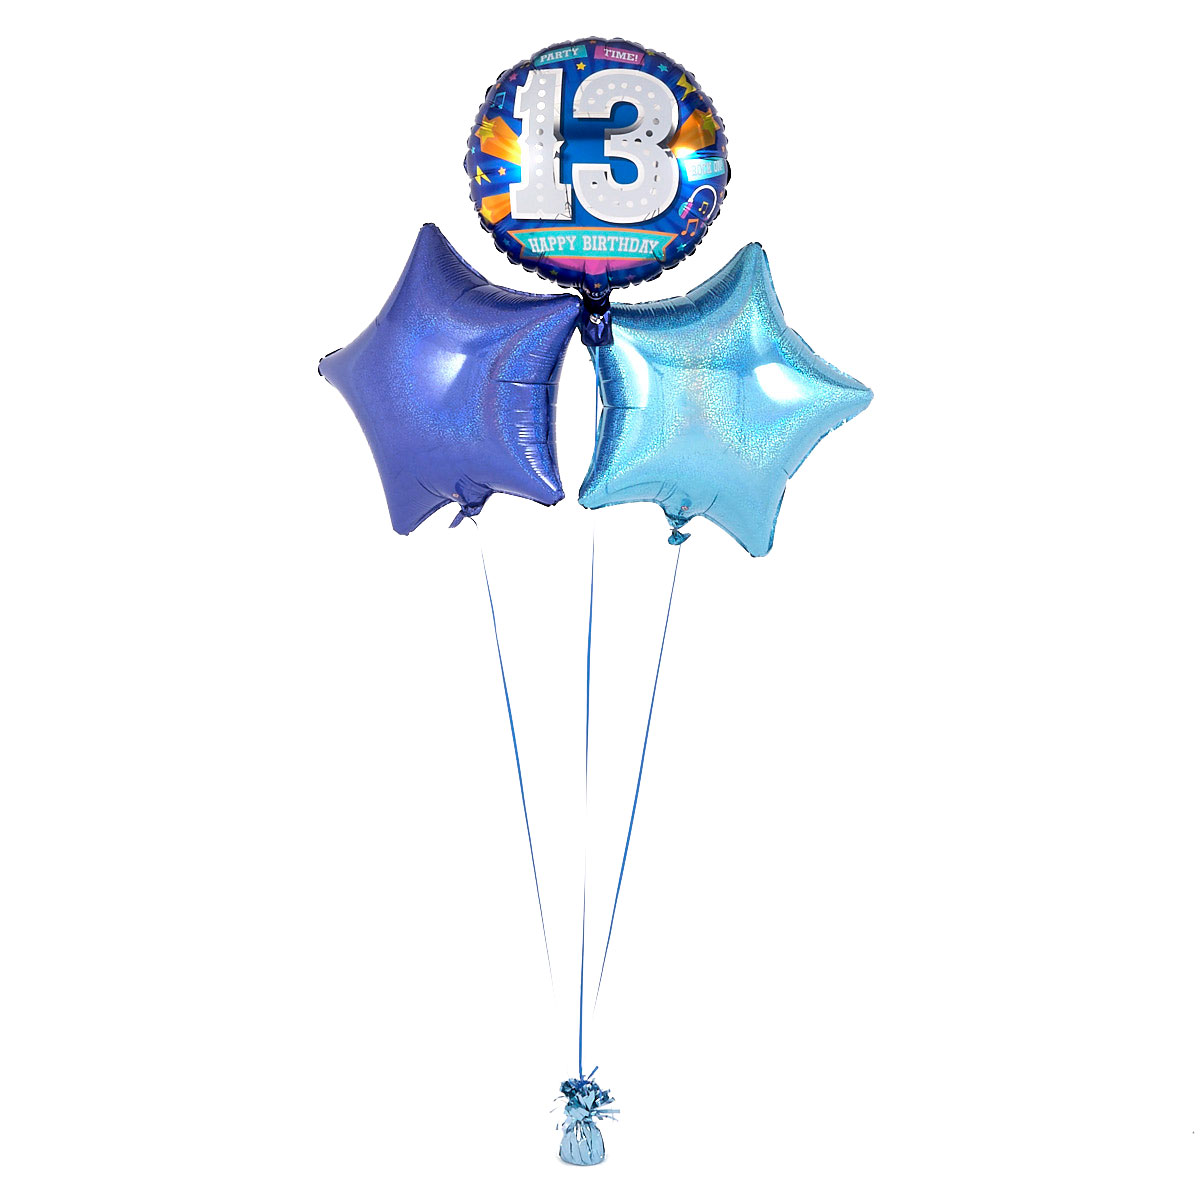 13th Birthday Blue Balloon Bouquet - DELIVERED INFLATED!